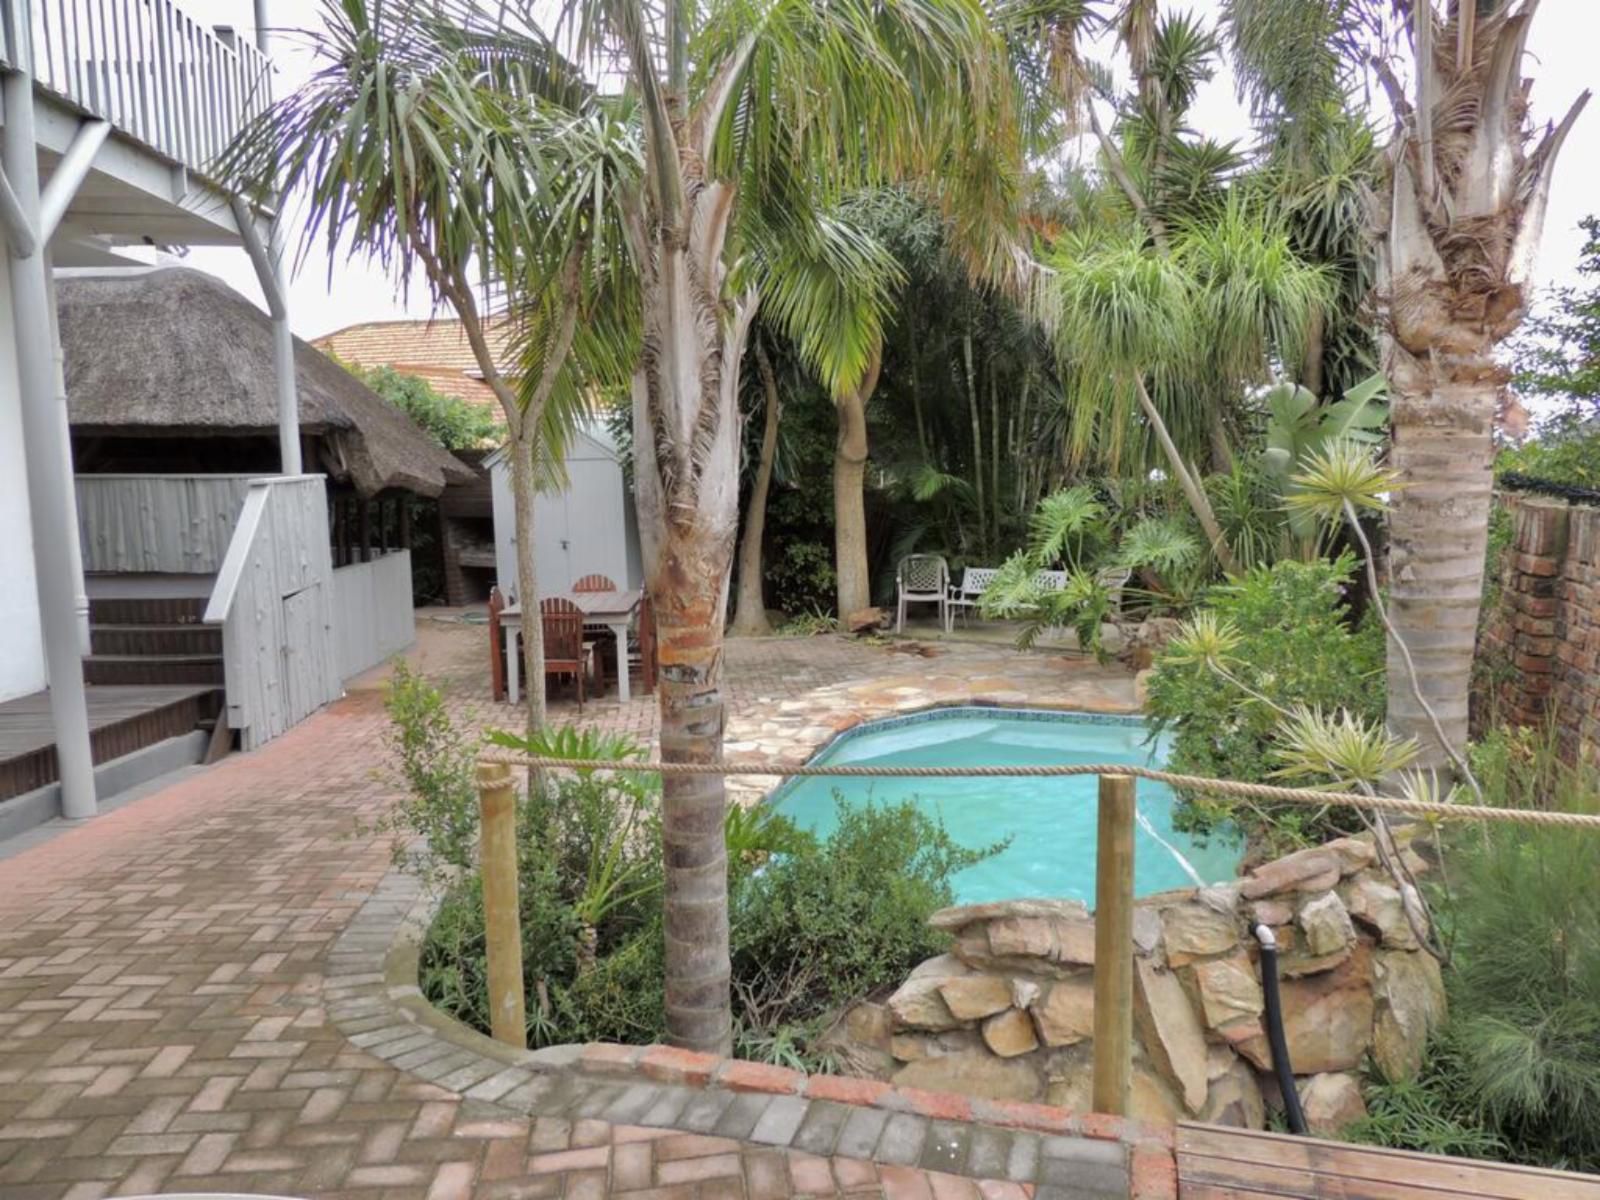 La Mer Guesthouse Humewood Port Elizabeth Eastern Cape South Africa House, Building, Architecture, Palm Tree, Plant, Nature, Wood, Garden, Swimming Pool